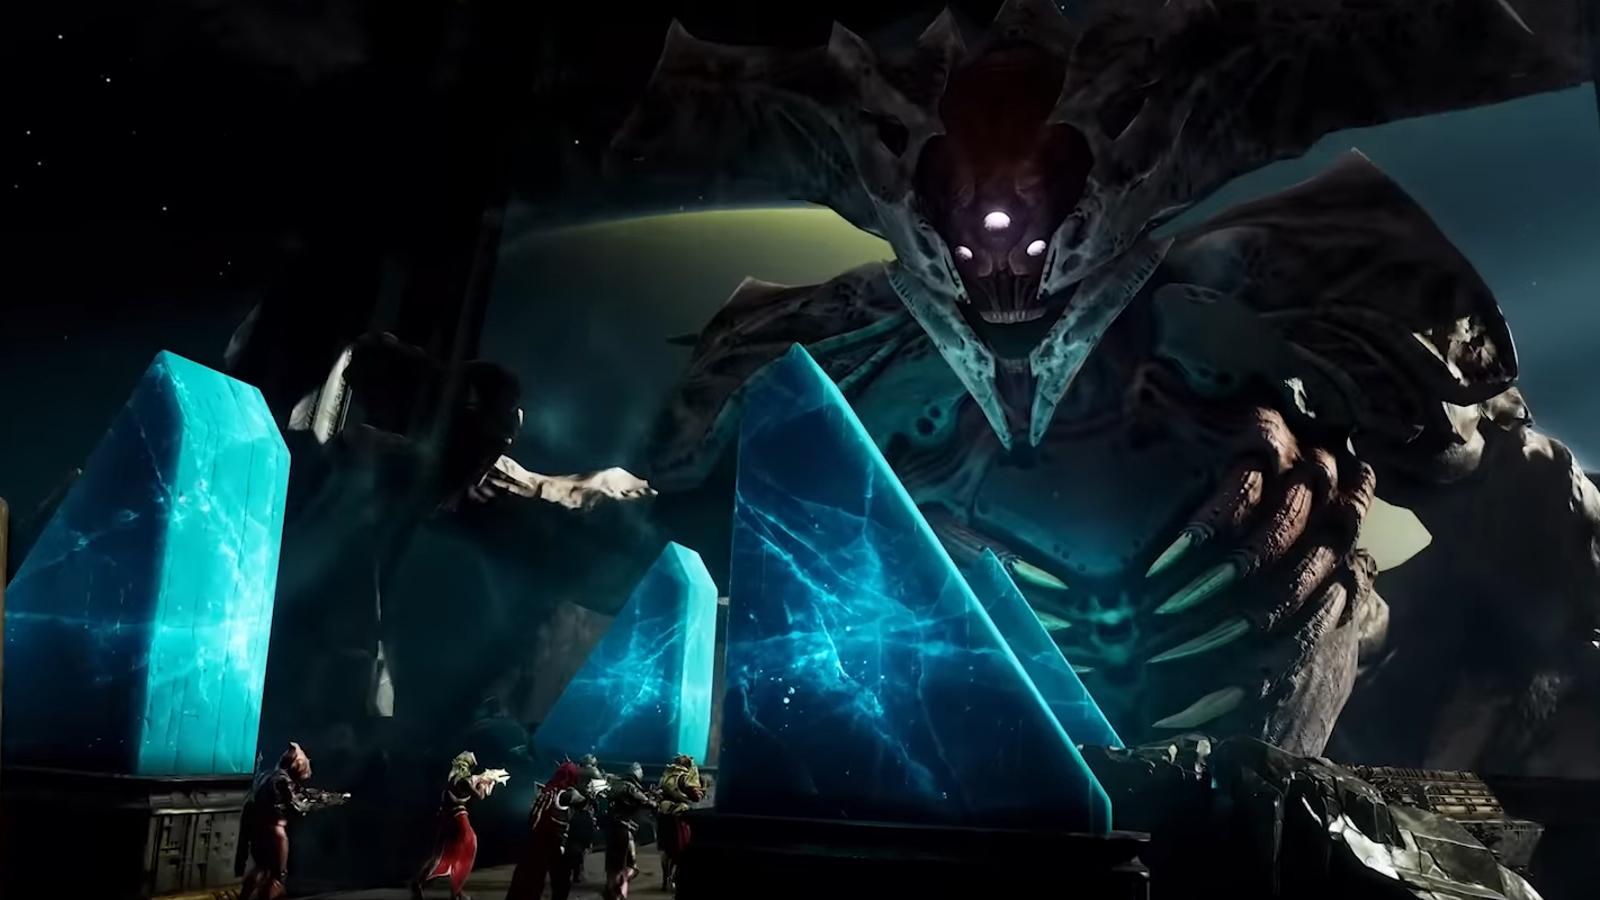 oryx, the final boss of the king's fall raid in destiny 2 about to fight fireteam.